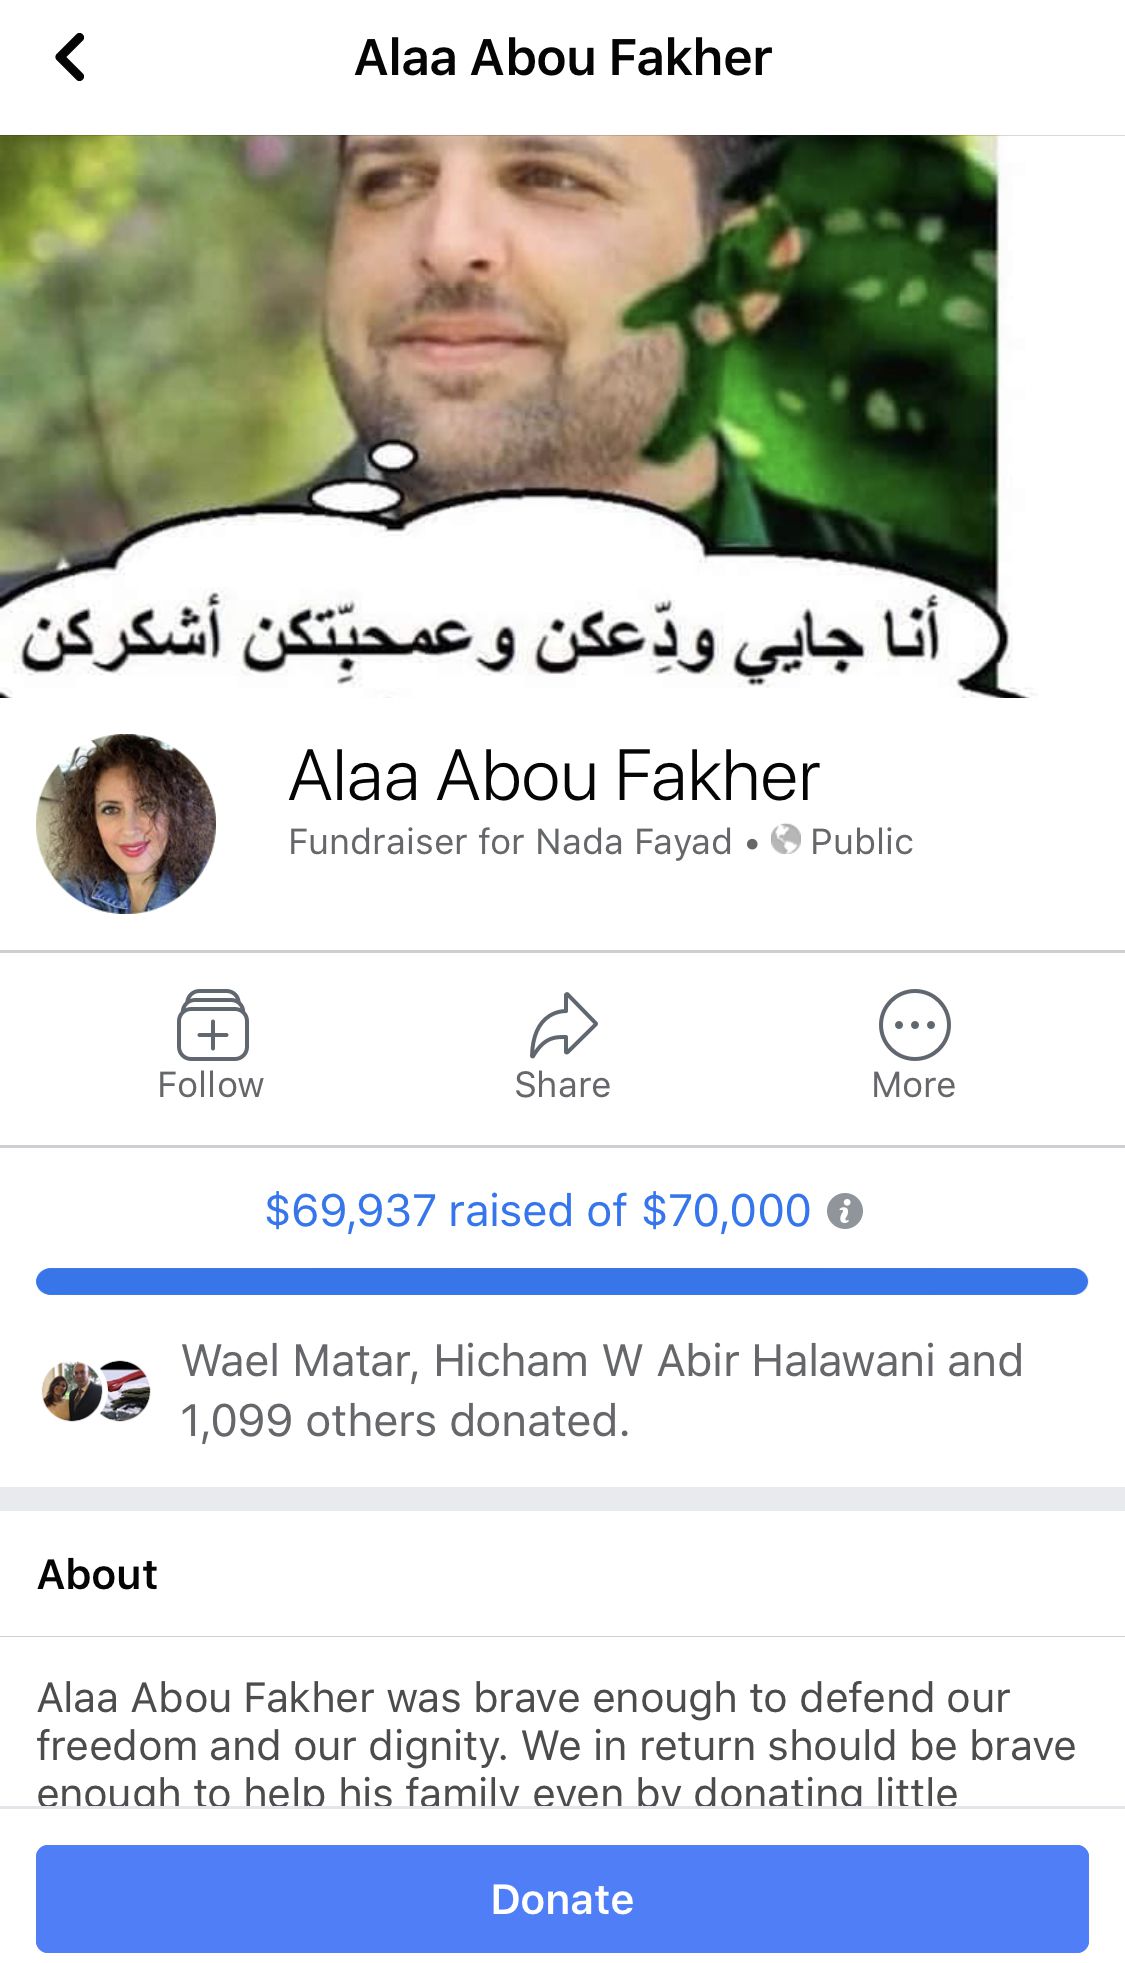 Facebook Fundraiser In Support of Alaa Abou Fakher’s Family